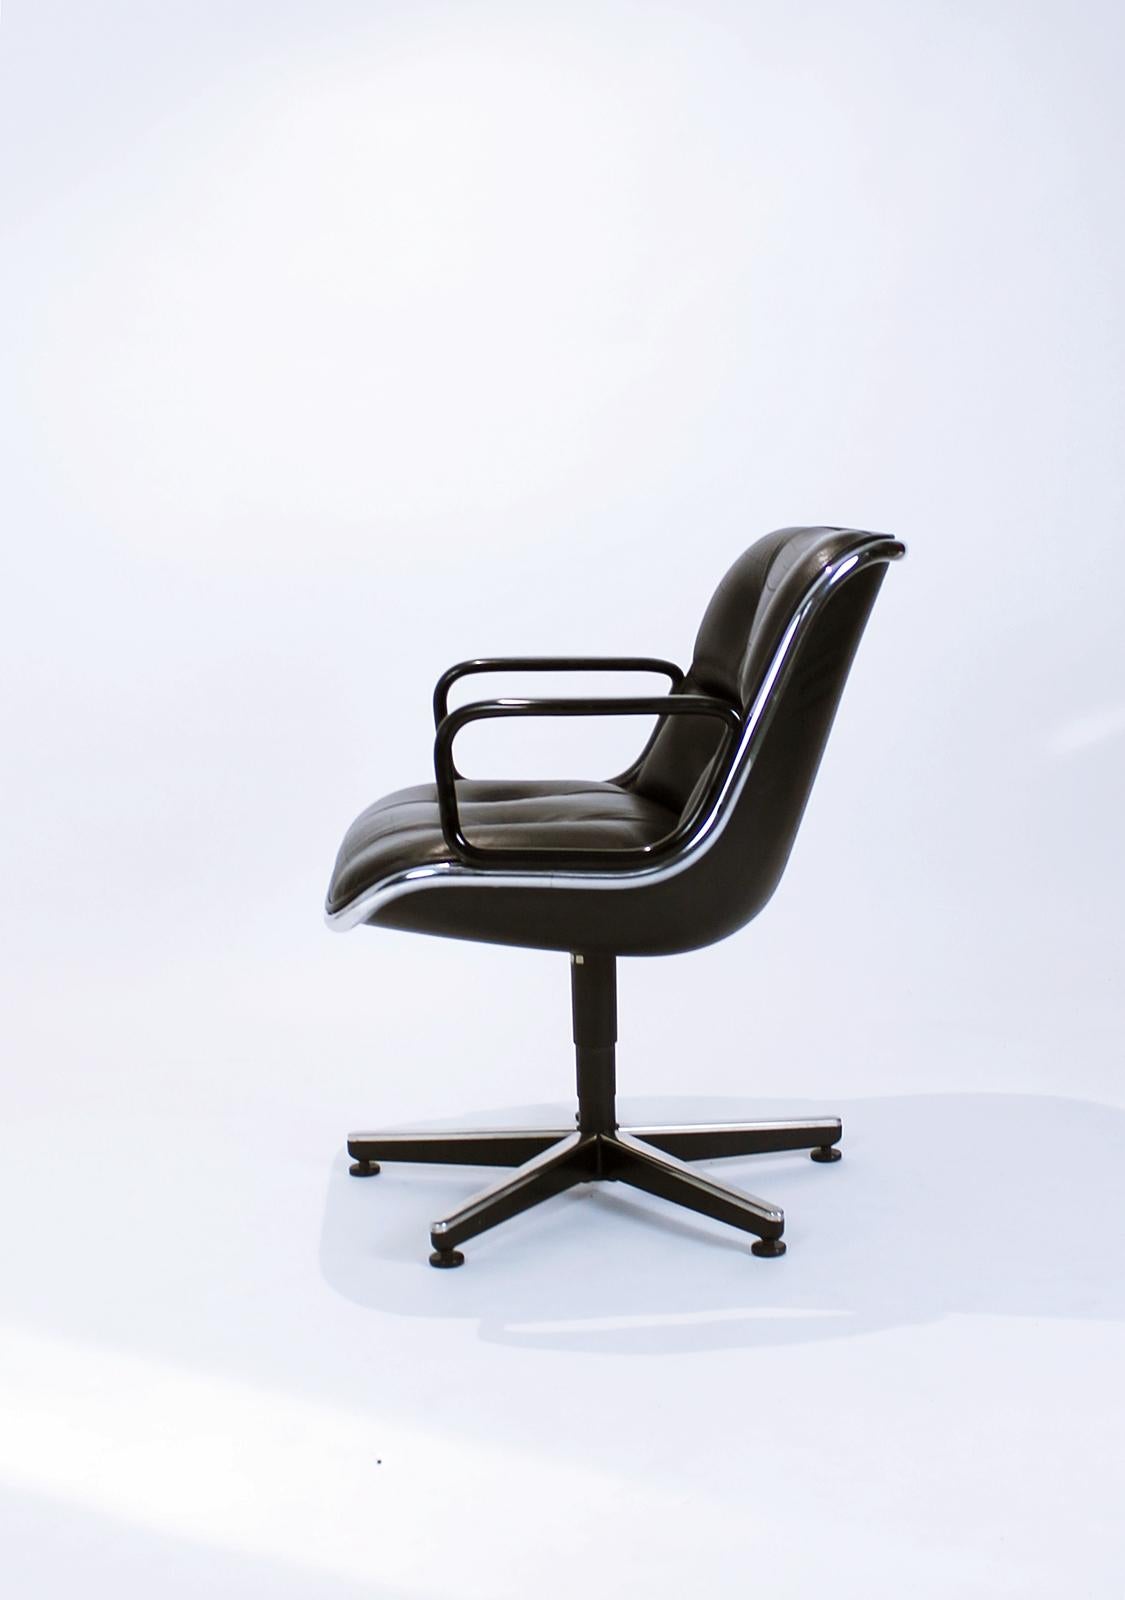 Late 20th Century Midcentury Executive Swivel Armchair by Charles Pollock for Knoll International For Sale